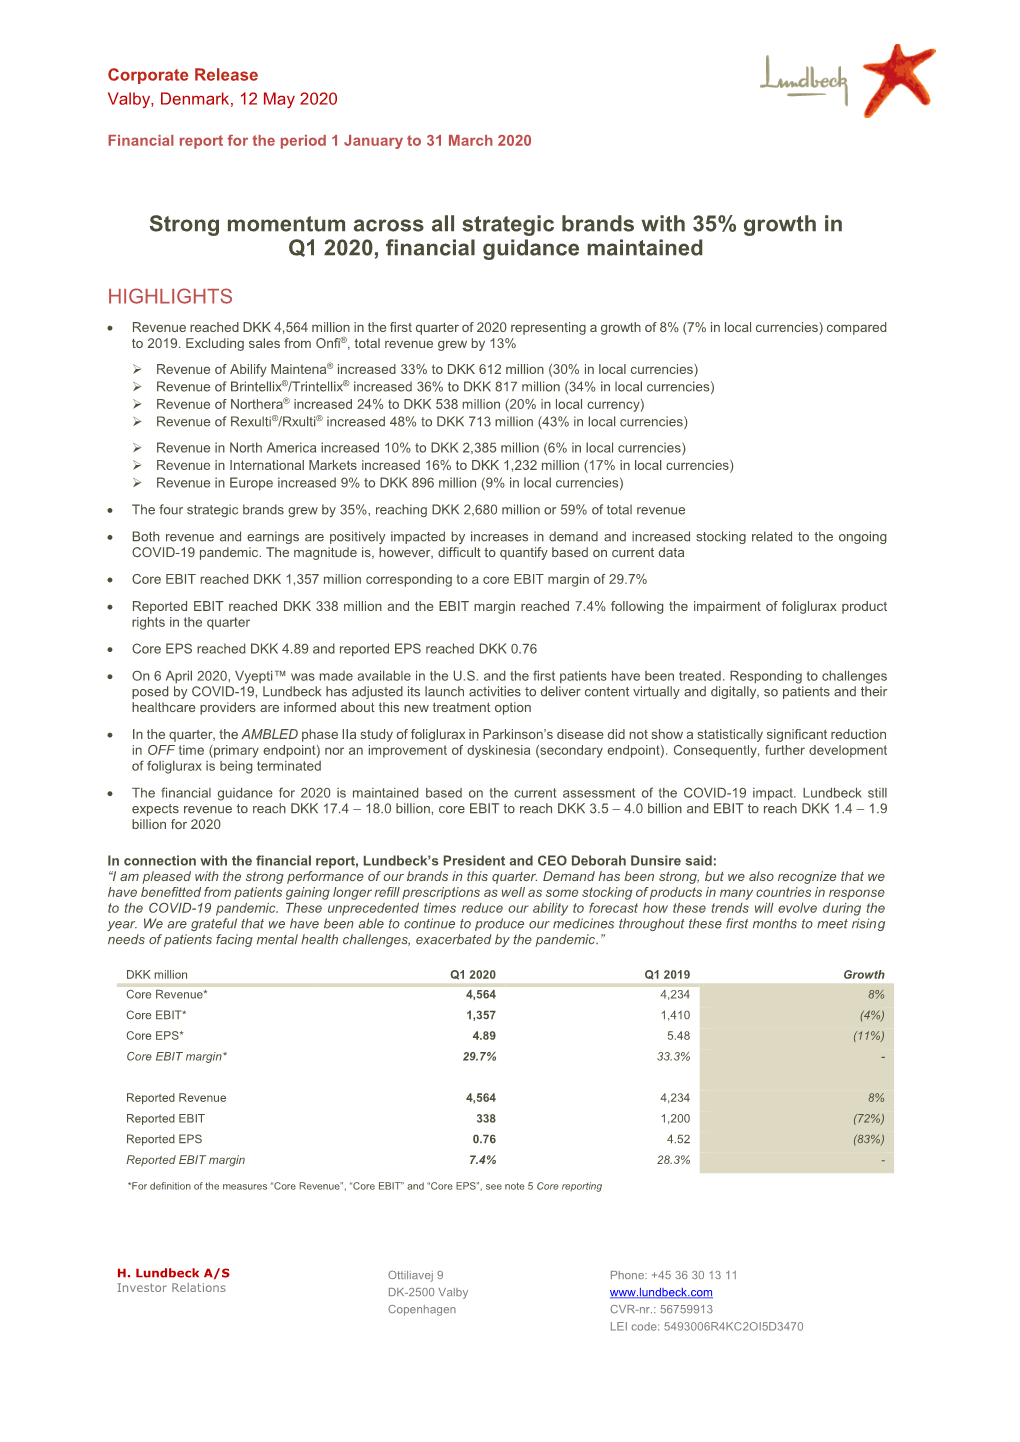 Strong Momentum Across All Strategic Brands with 35% Growth in Q1 2020, Financial Guidance Maintained